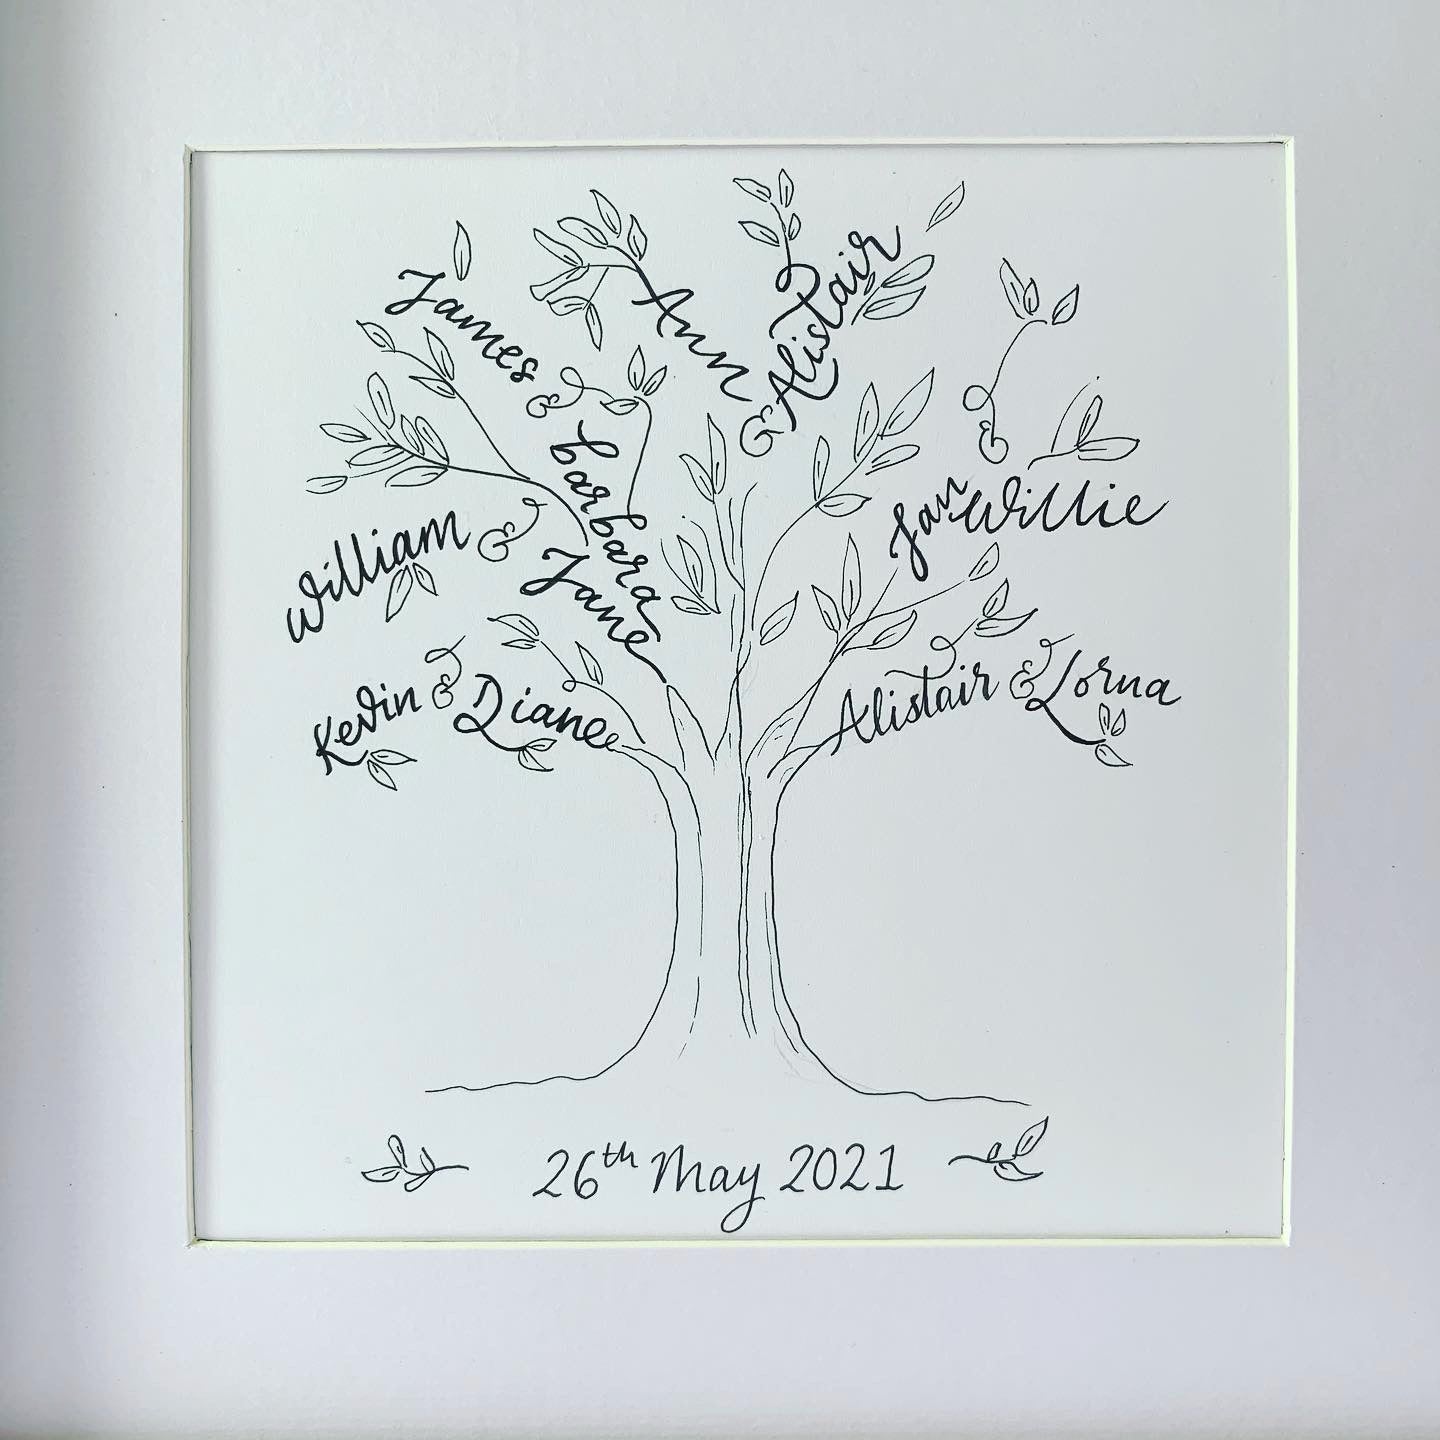 close up of family tree in black and white names as branches with leaves and tree trunk. date at bottom